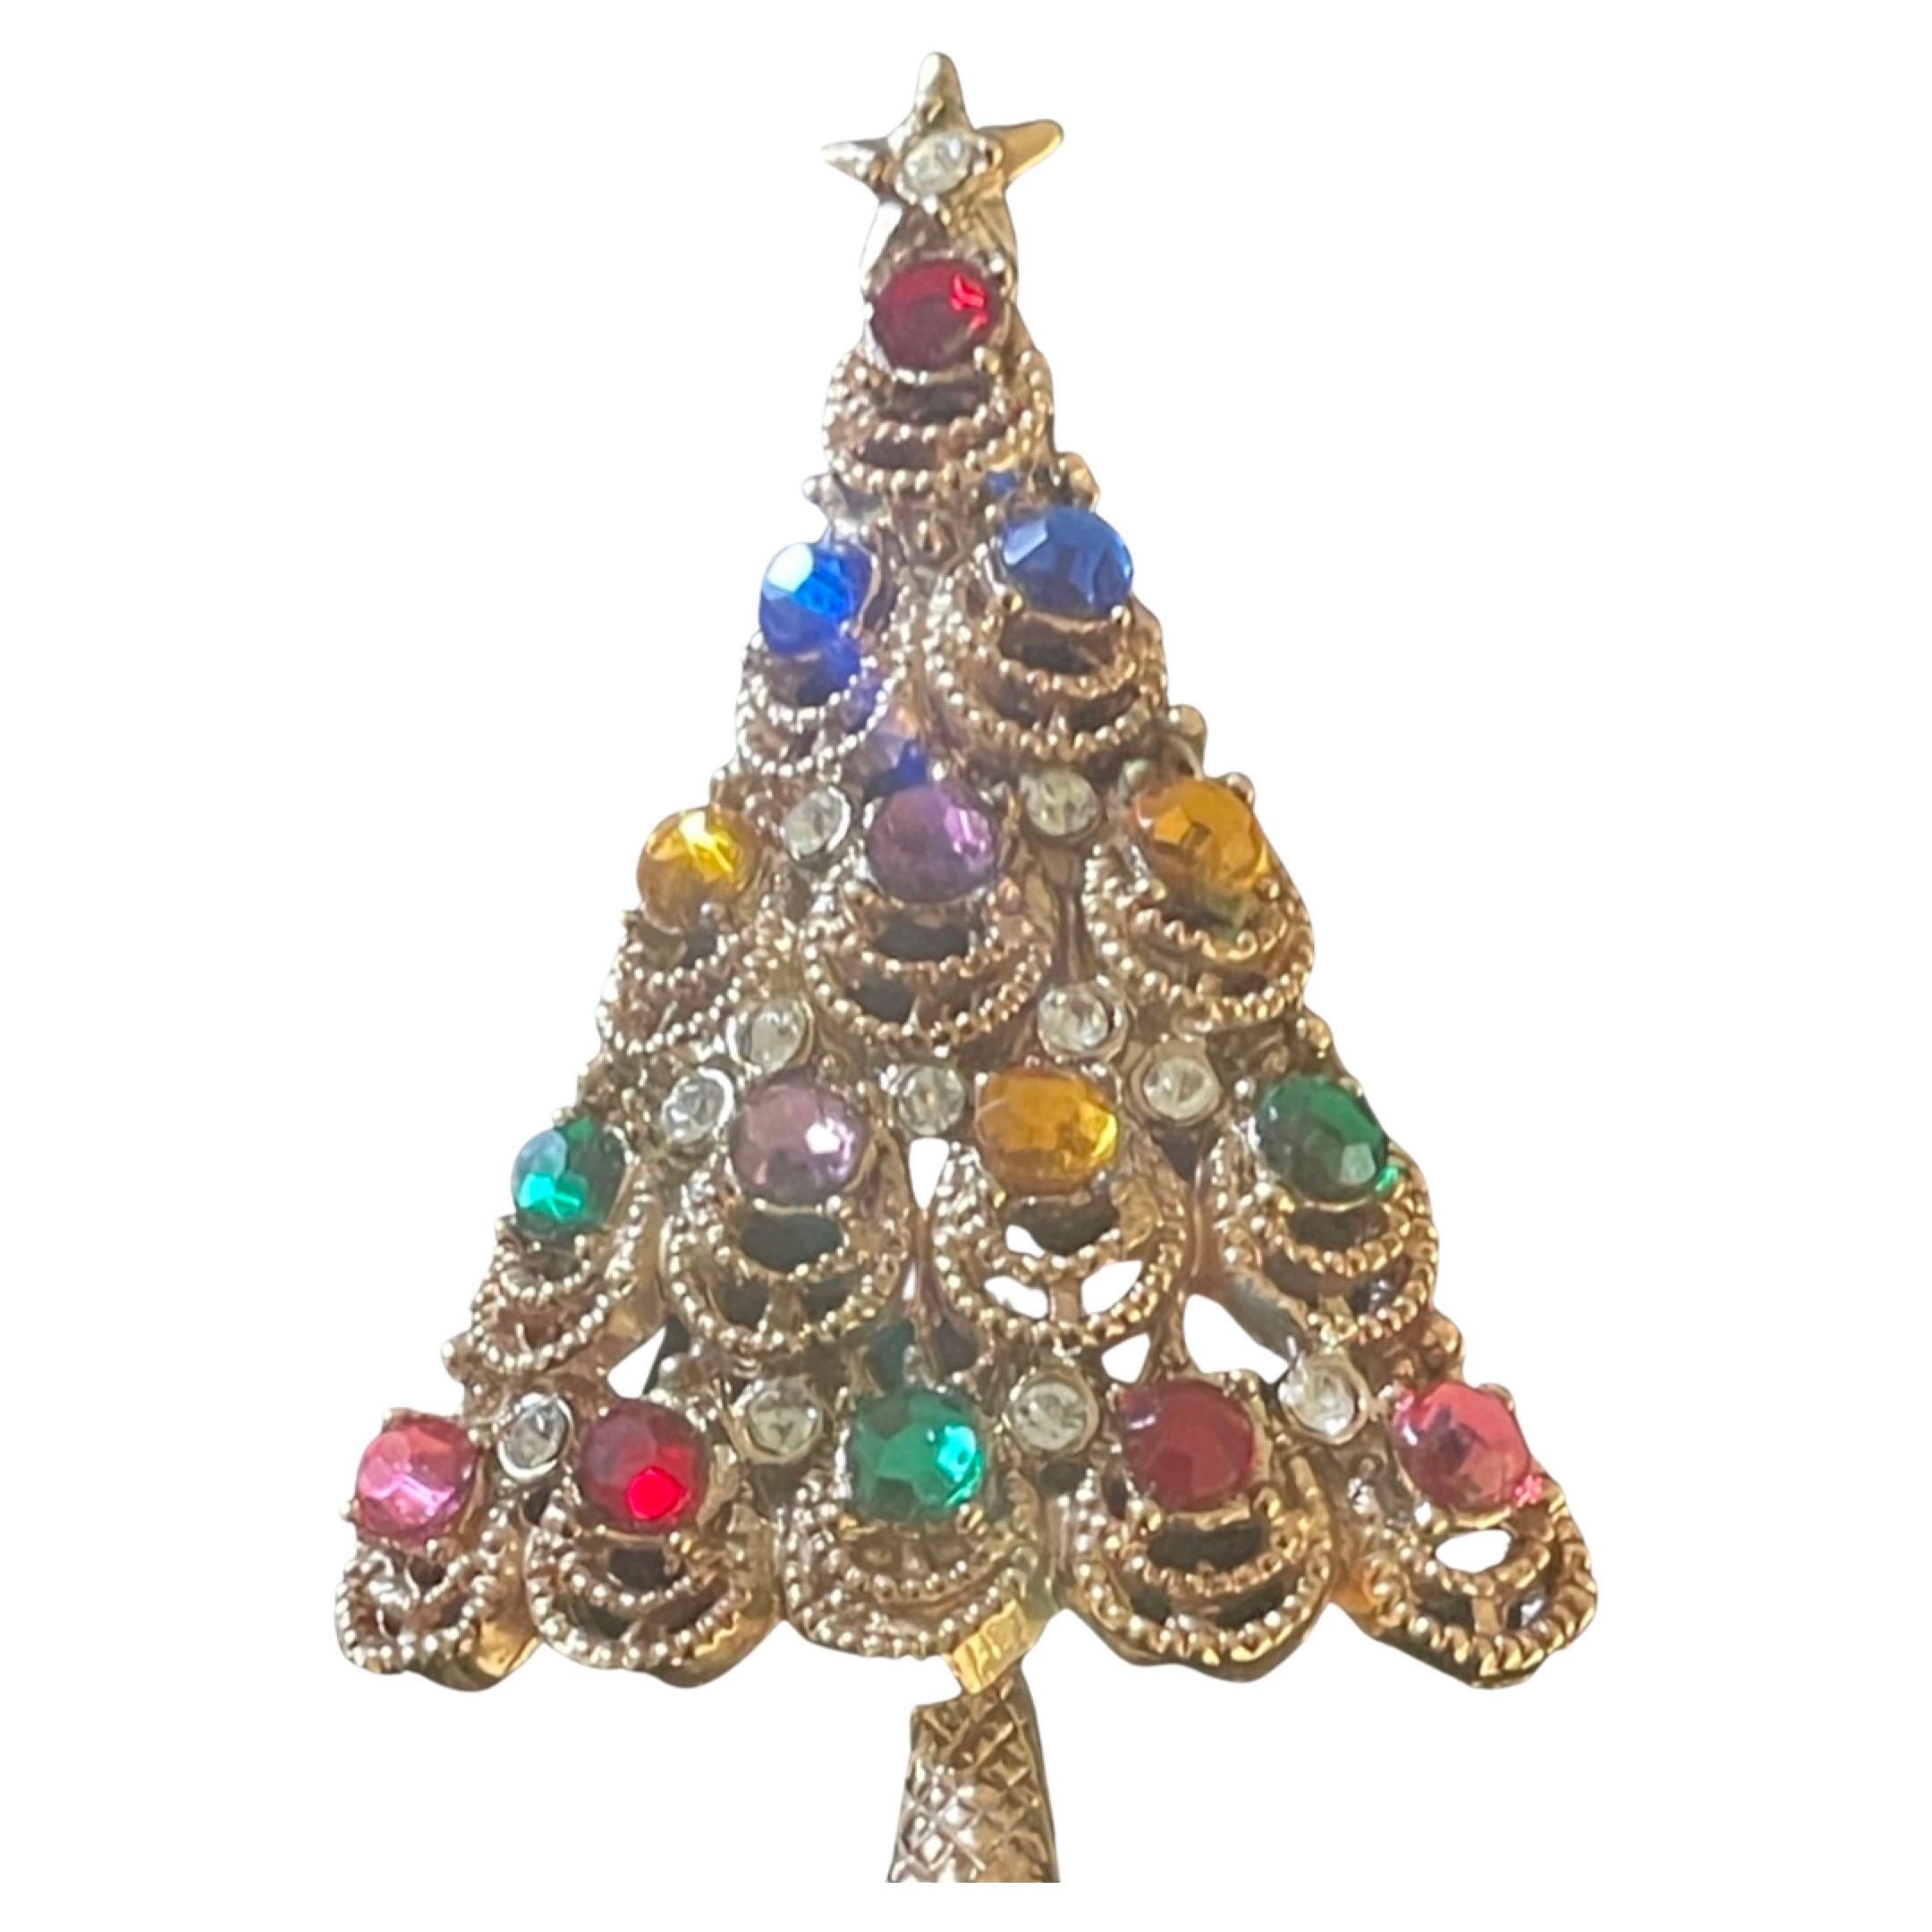 Unsigned Circa. 1938-1947 Hollycraft Christmas tree made in gold tone, with rhinestones that appear to be the lights on the tree.  Known for its pastel colors you will see the classic green and red, along with pink, purple, blue, gold, and green. 